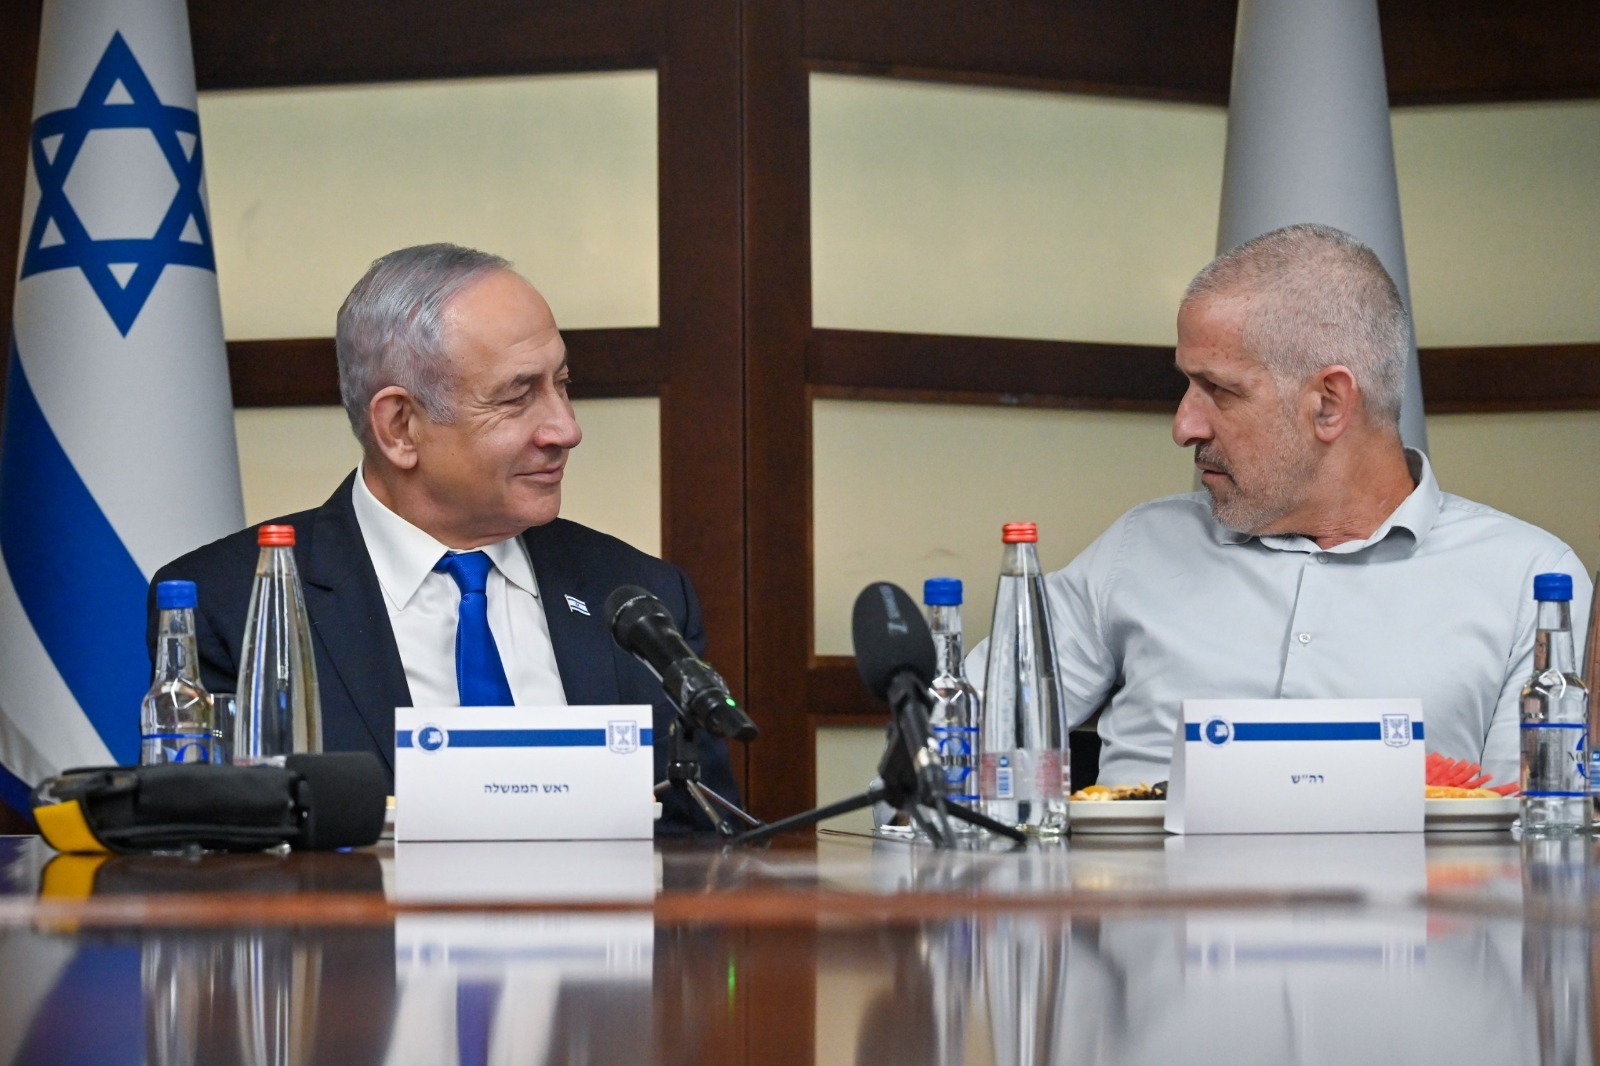 REPORT: Israeli Response To Iran Isn't Over, And Netanyahu Publicly Meets With Mossad, Shin Bet